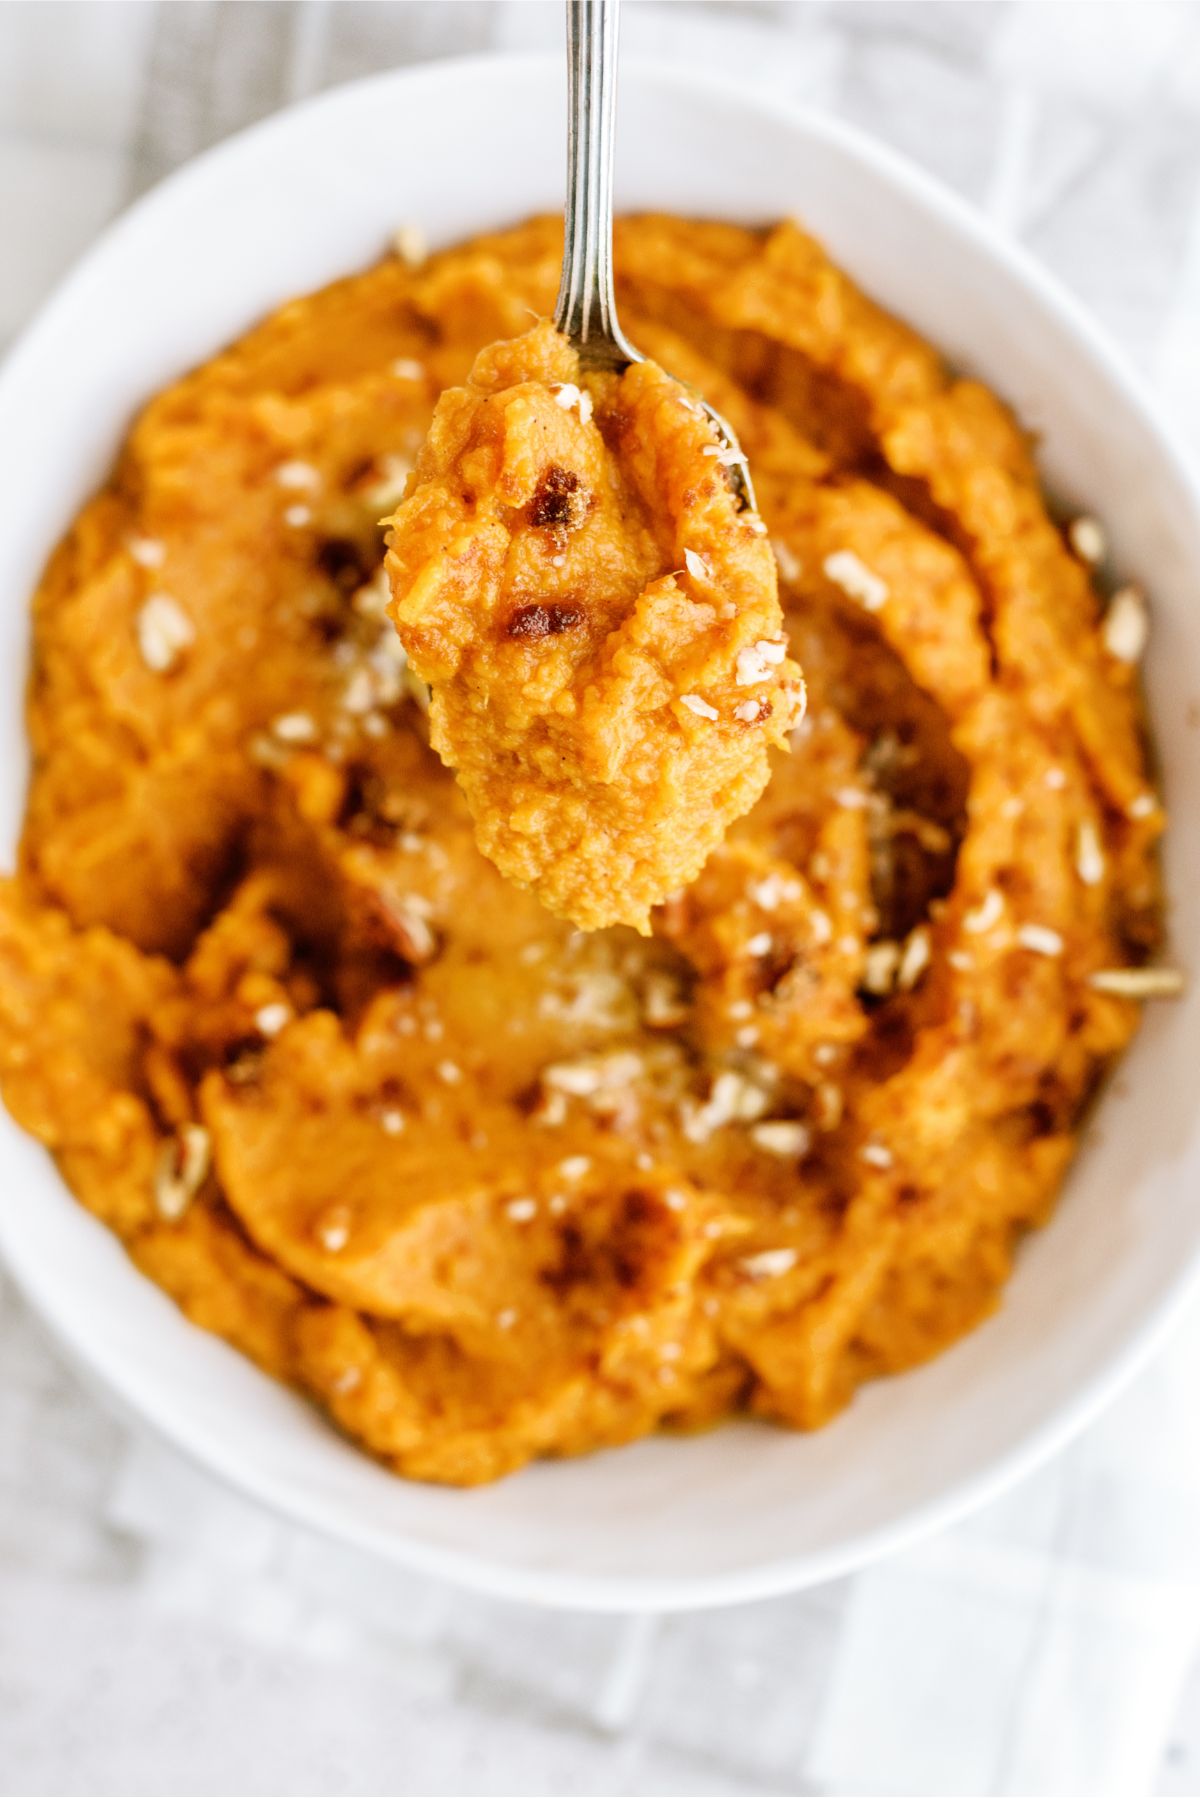 Top view of Mashed Sweet Potatoes with a spoon